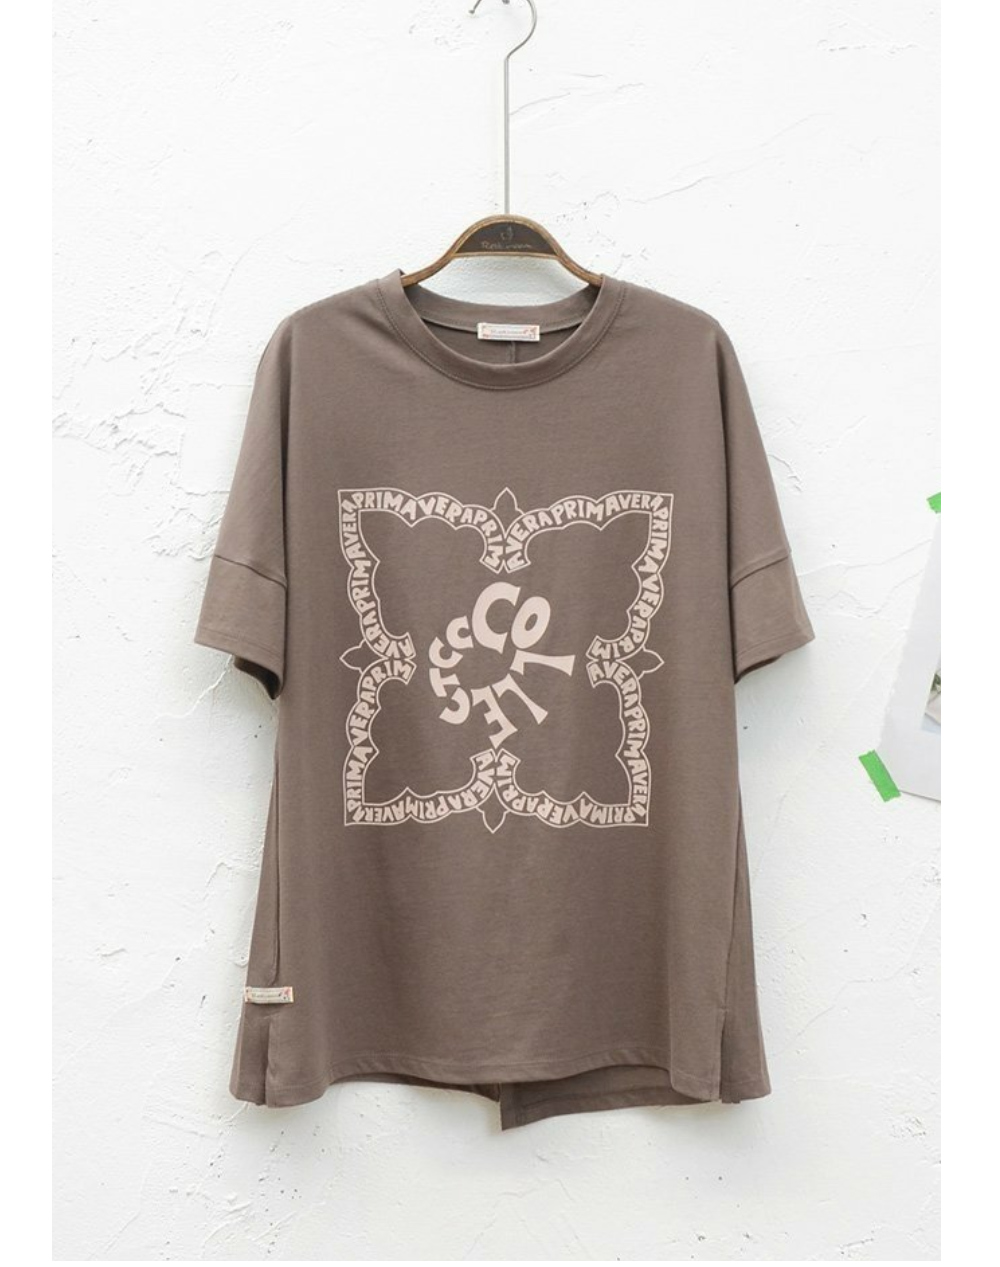 short sleeved tee oatmeal color image-S1L66